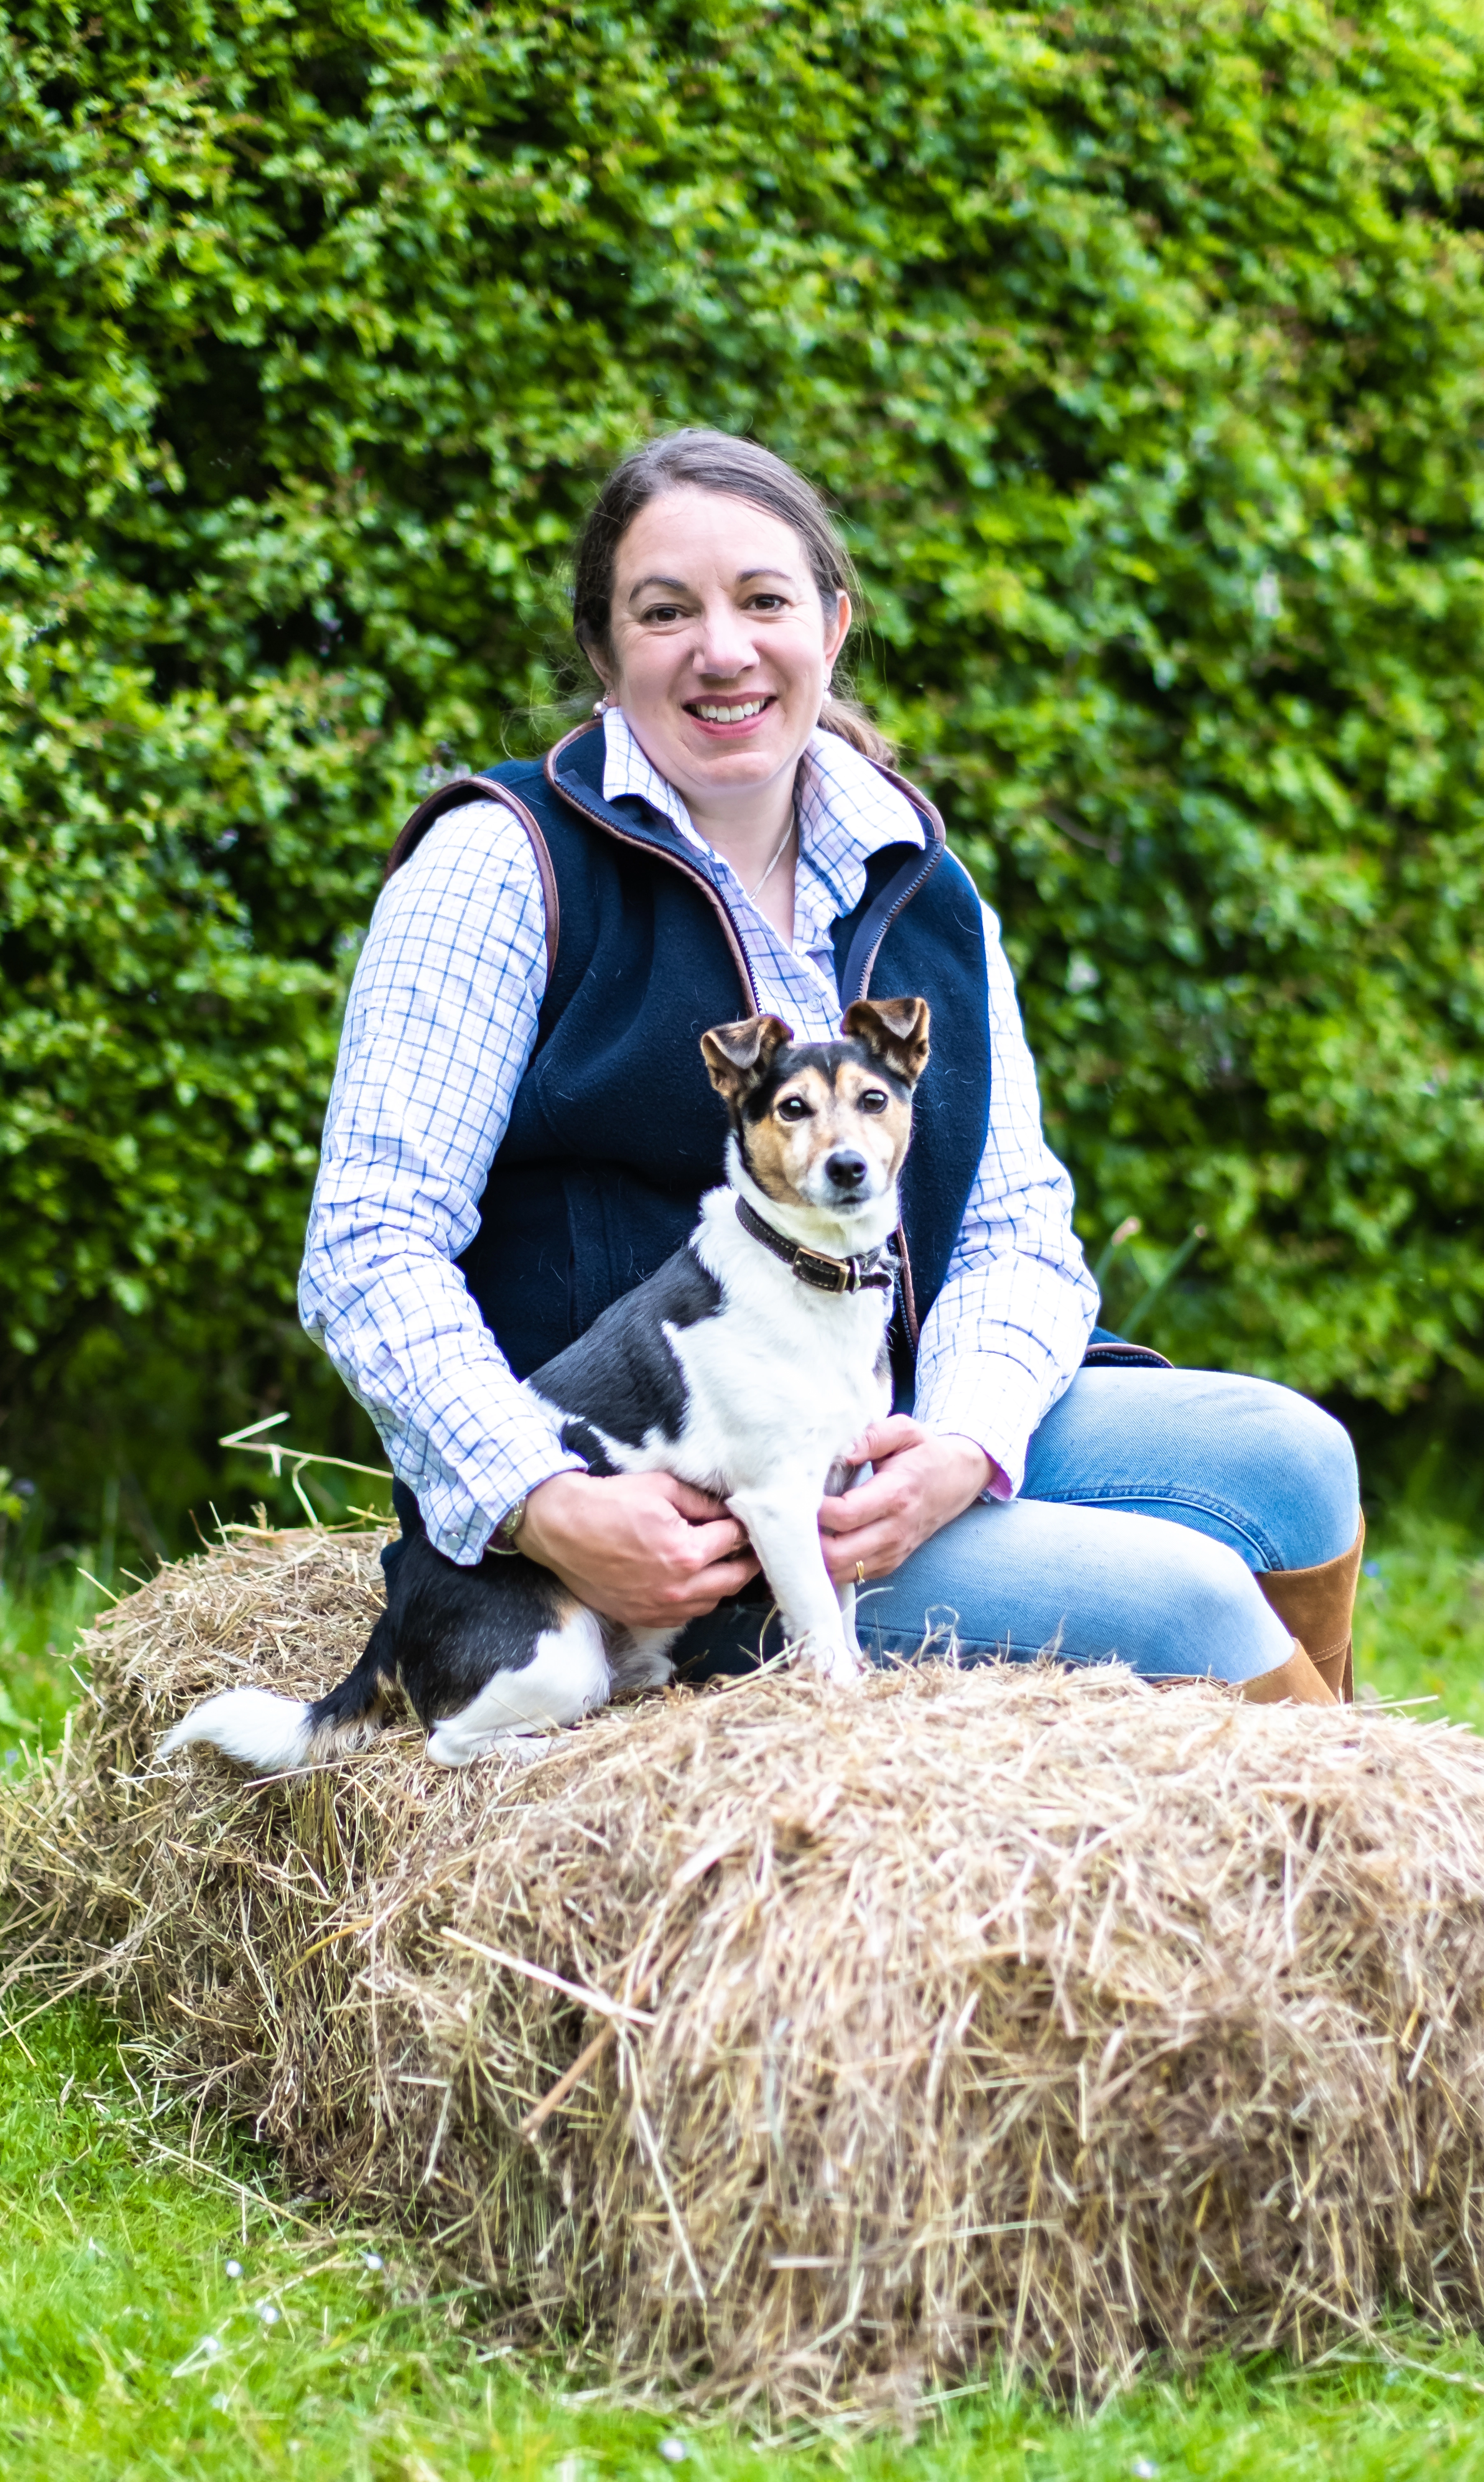 Me, Liz Cooke together with Chester my Jack Russell are the founders of Chester & Cooke